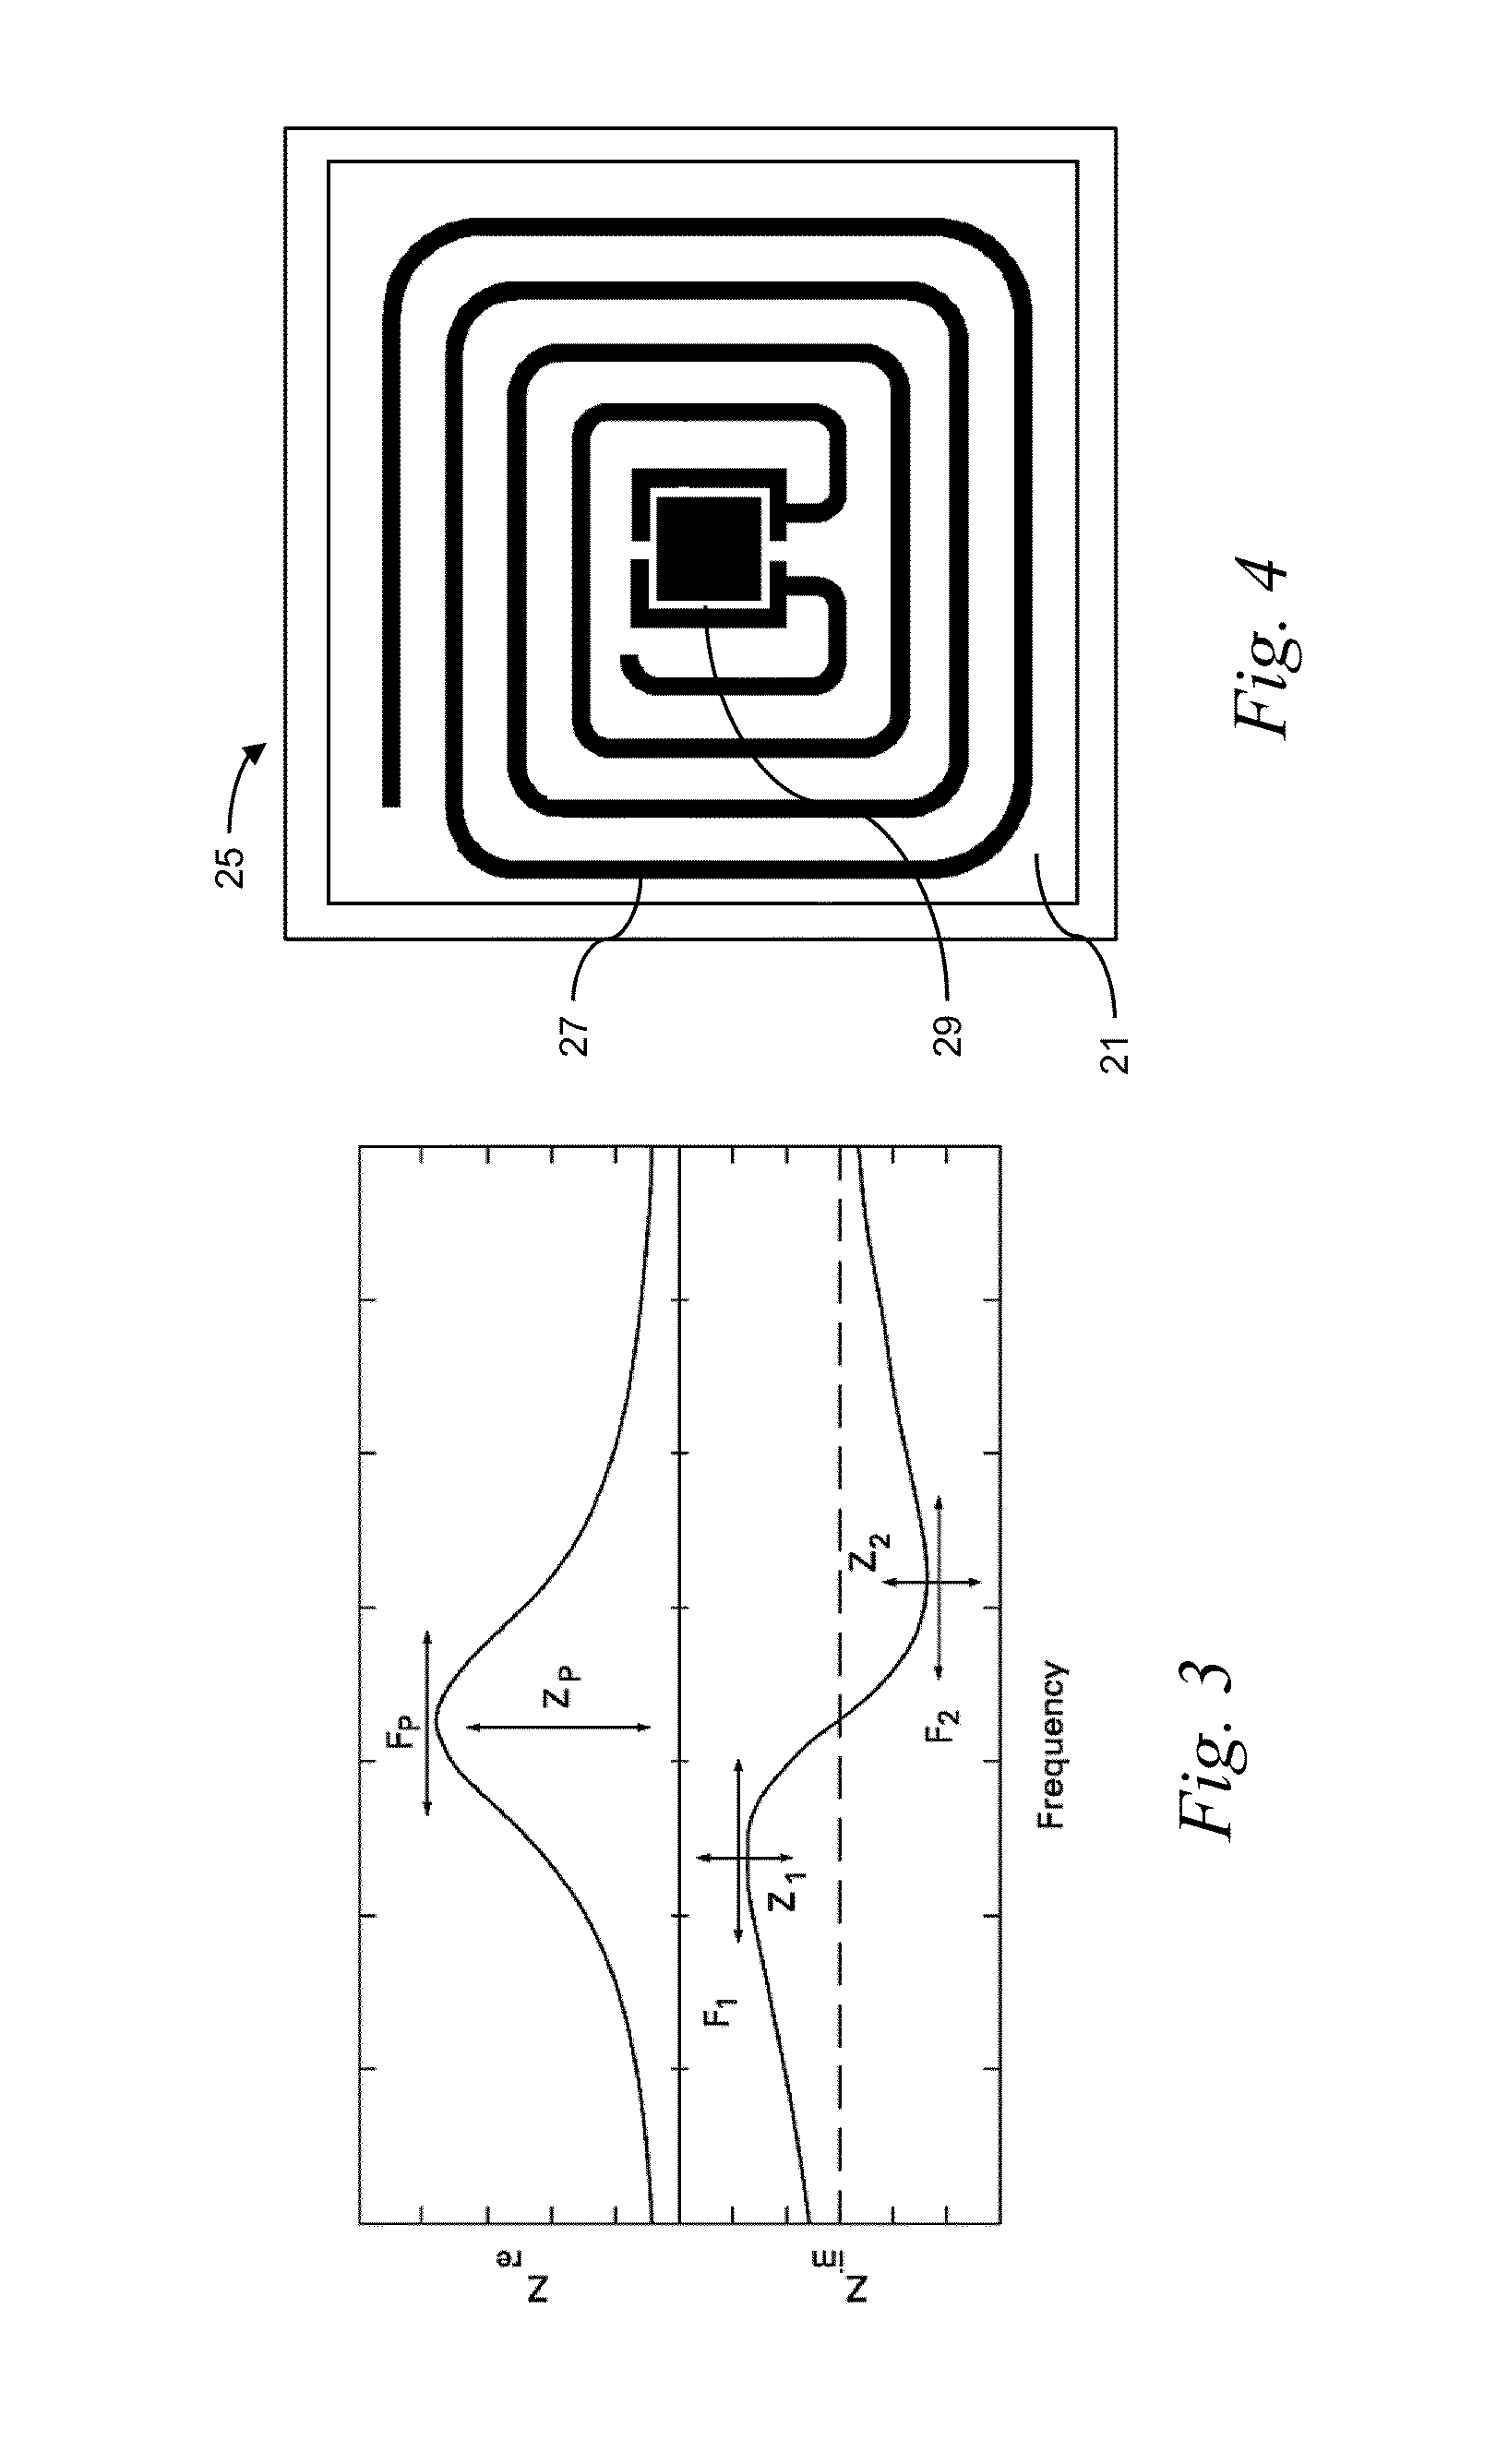 Systems and Methods for Measuring an Interface Level in a Multi-Phase Fluid Composition